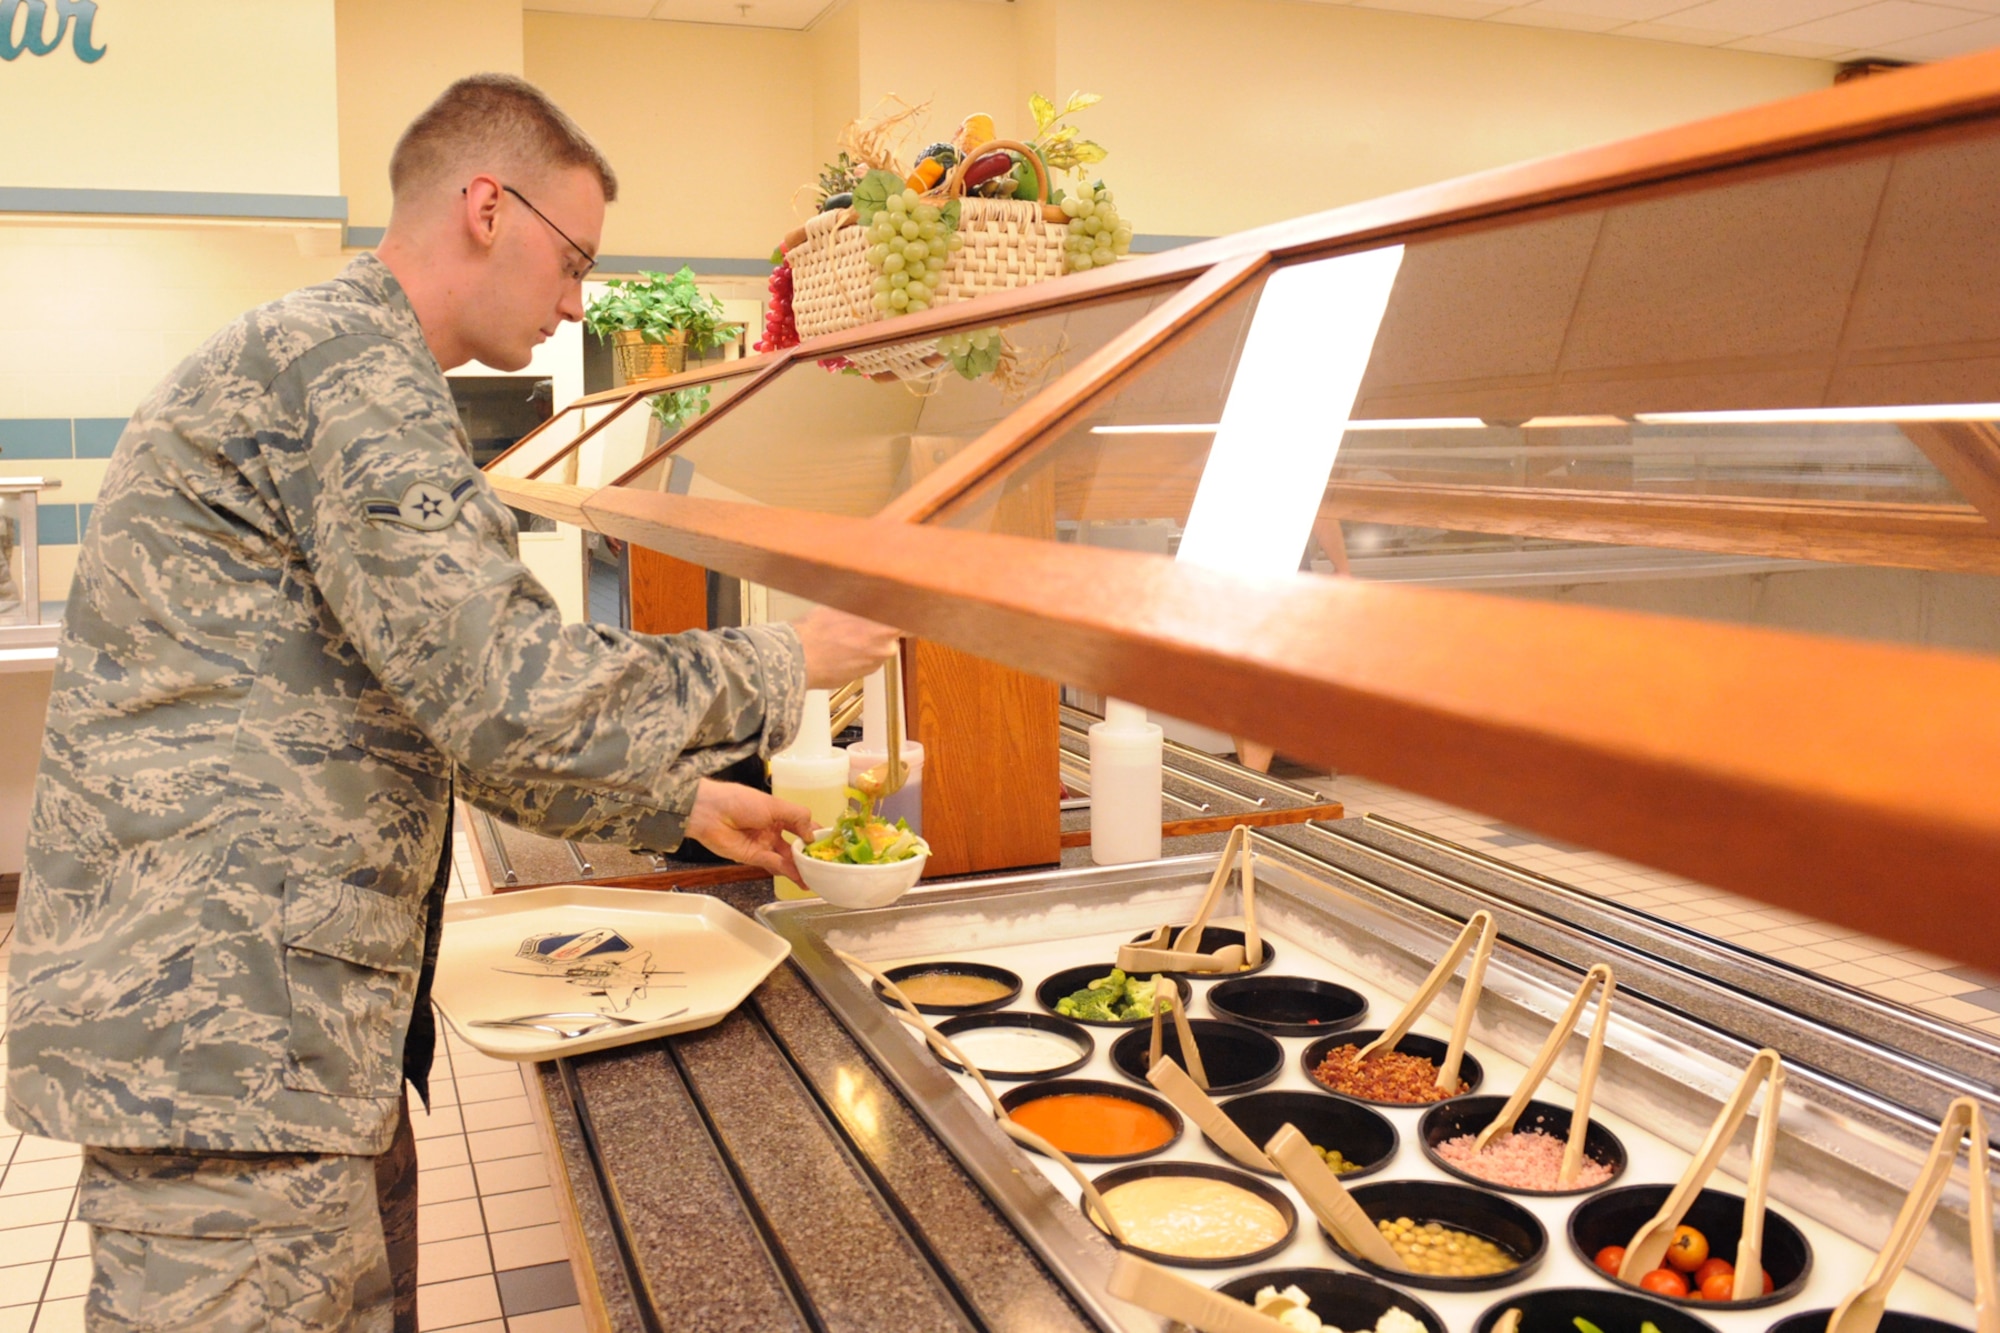 Airman Thomas Kendall, 4th Logistics Readiness Squadron, makes a salad at the Southern Eagle Dining Facility on Seymour Johnson Air Force Base, N.C., June 16, 2009. Airmen enjoy eating at the dining facility because of its convenient location to the dorms. (U.S. Air Force photo by Airman 1st Class Whitney S. Lambert)